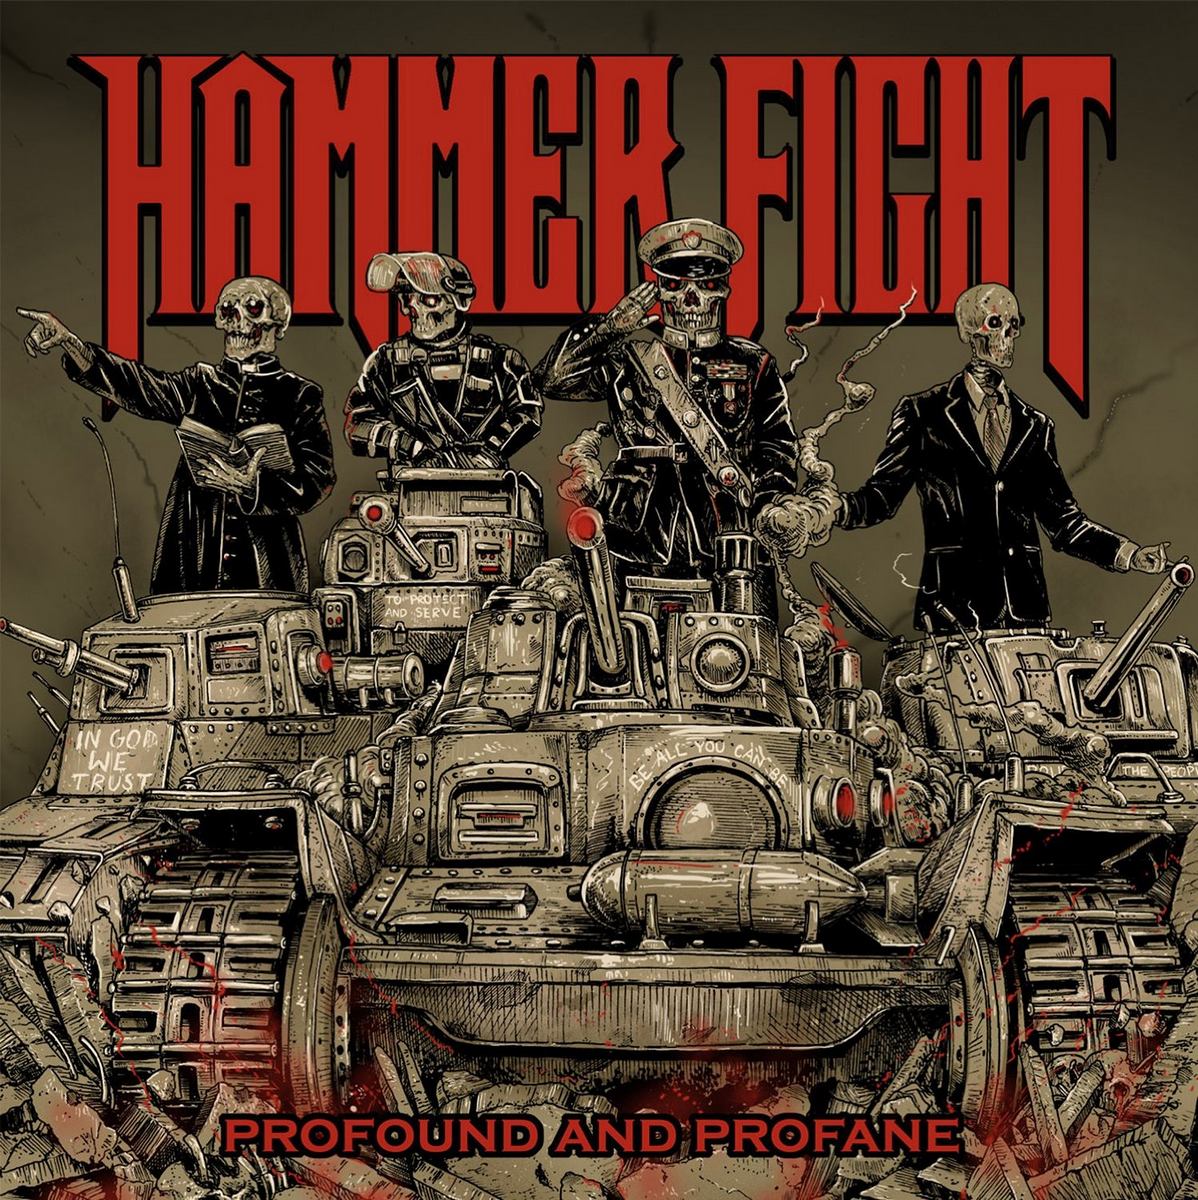 Hammer Fight: Profund and Profane (2016) Book Cover